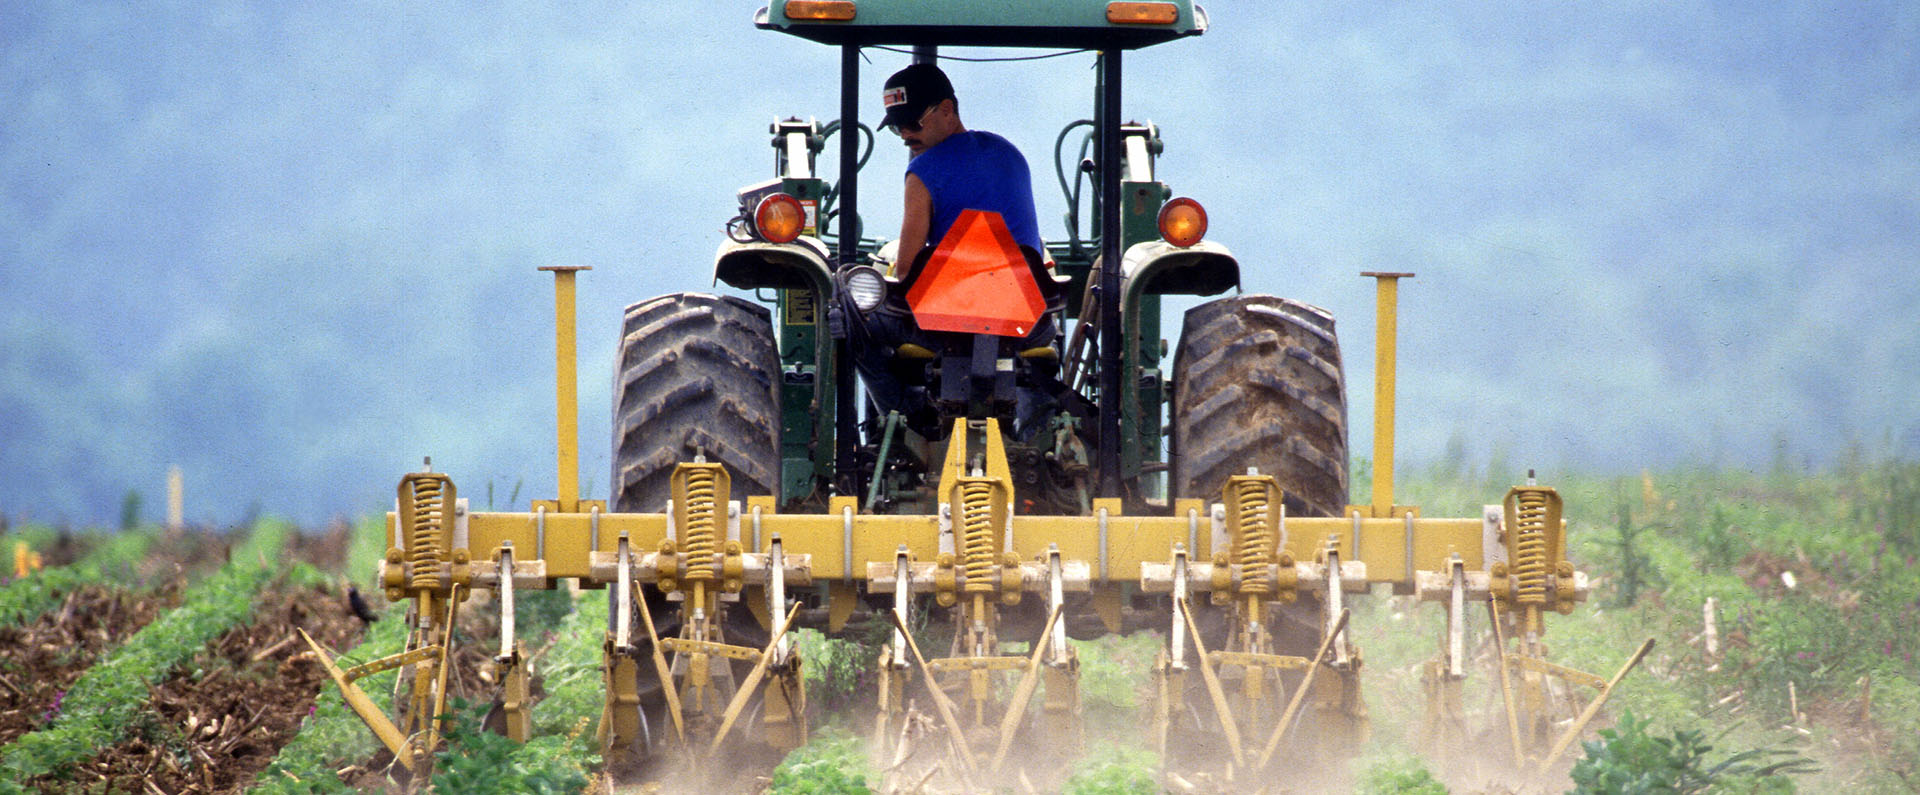 A tractor tilling a field